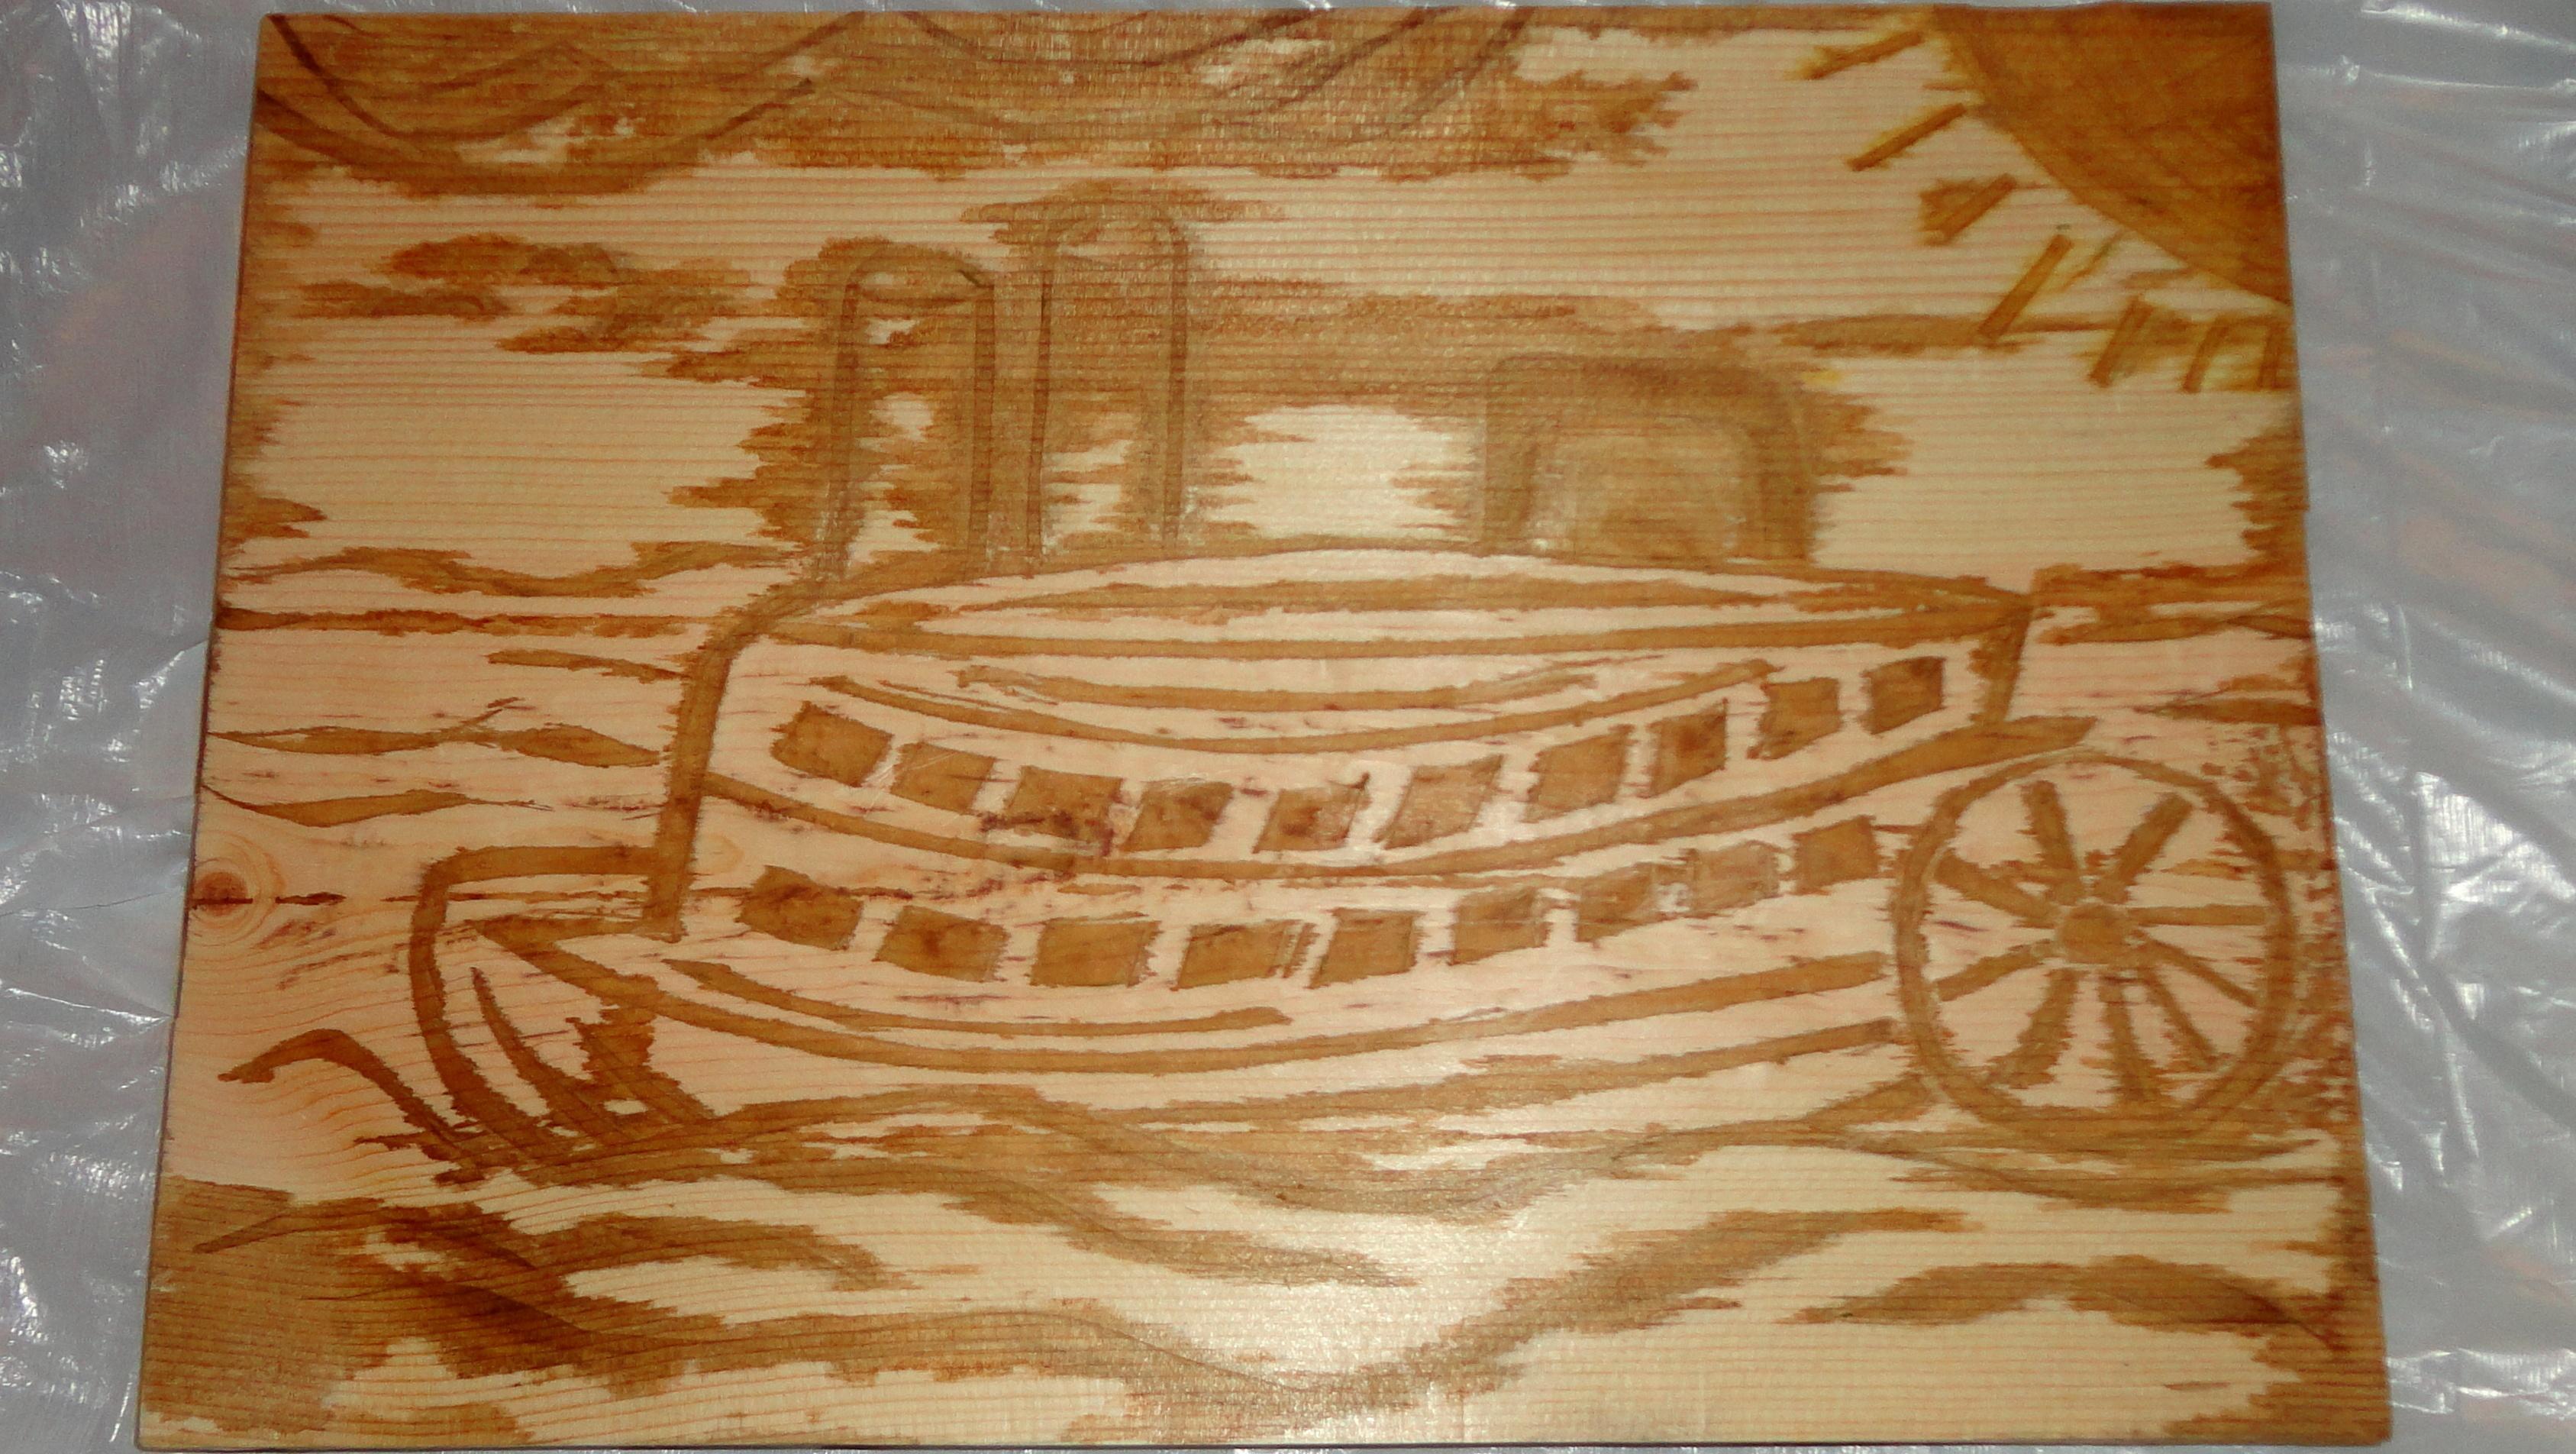 Photo of an art project - an image of a steamboat is stained onto a piece of wood. 